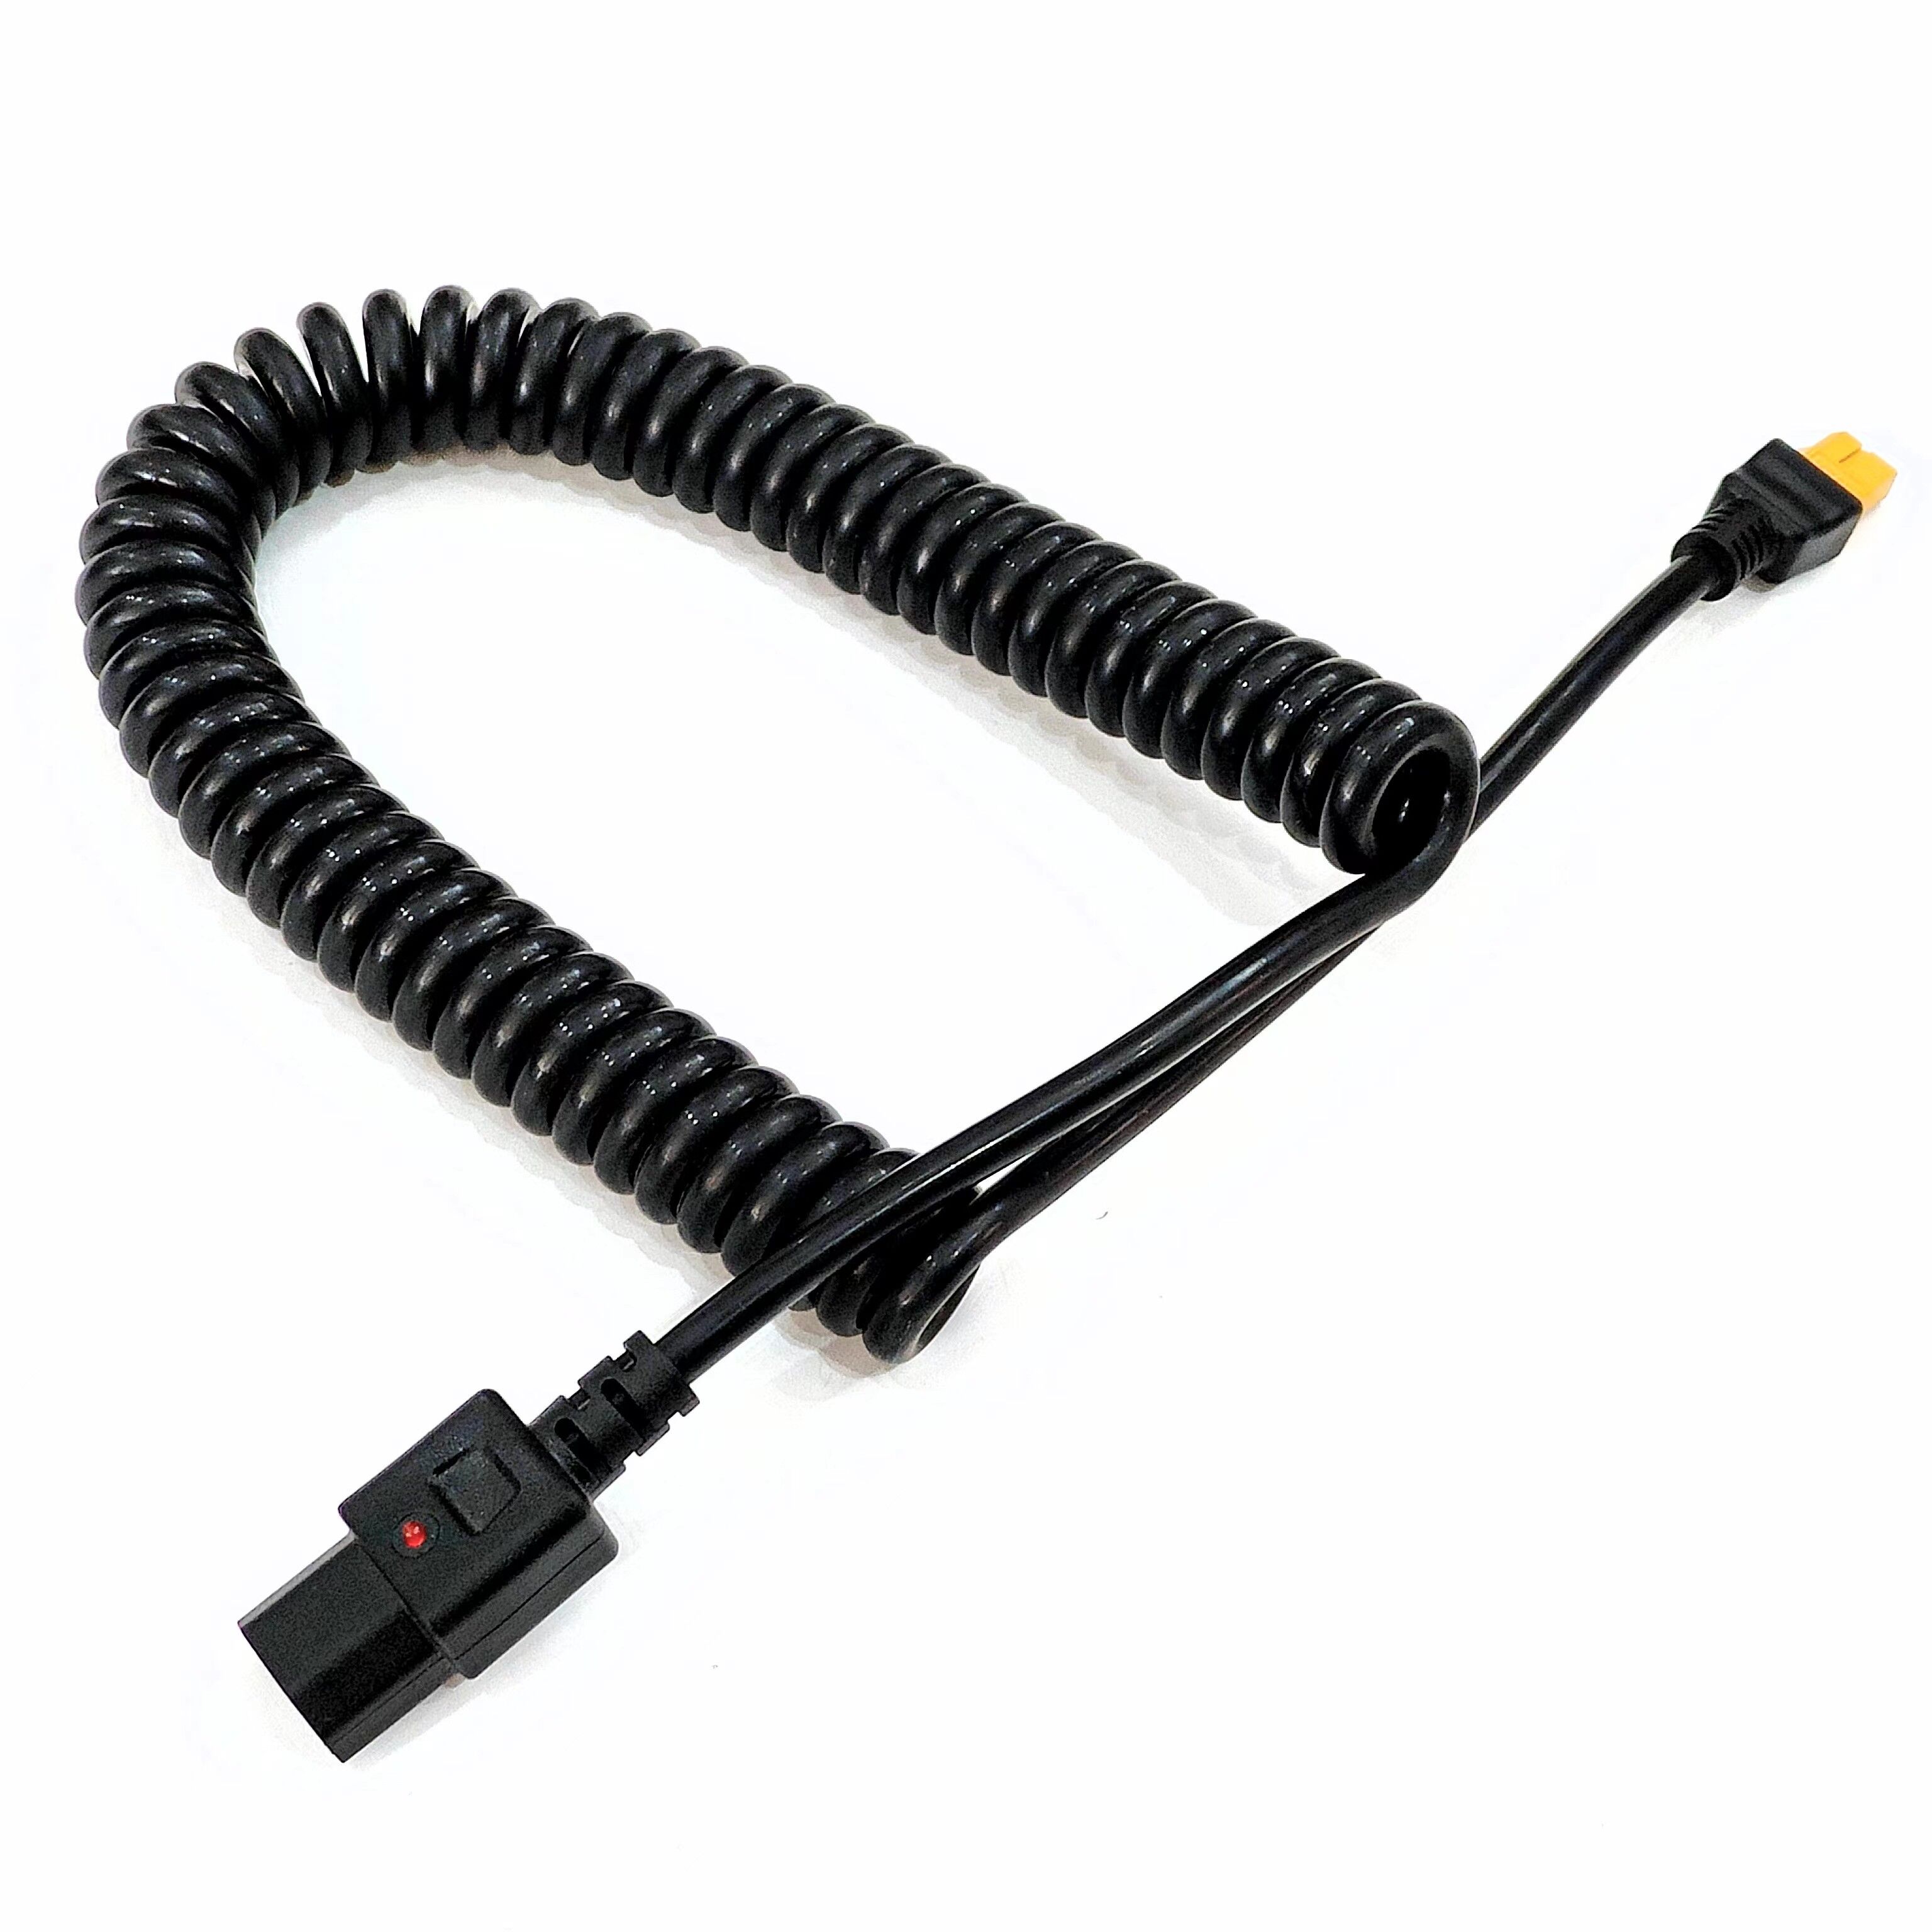 Xt60 Male With C14 Plug Spiral Cable. Xt60 Male Power Extension Spring Wire  - China Wholesale Spiral Cable ，xt60 ，spring Wire $3.5 from Ningbo Weiheng  Electronic Technology Co.,Ltd